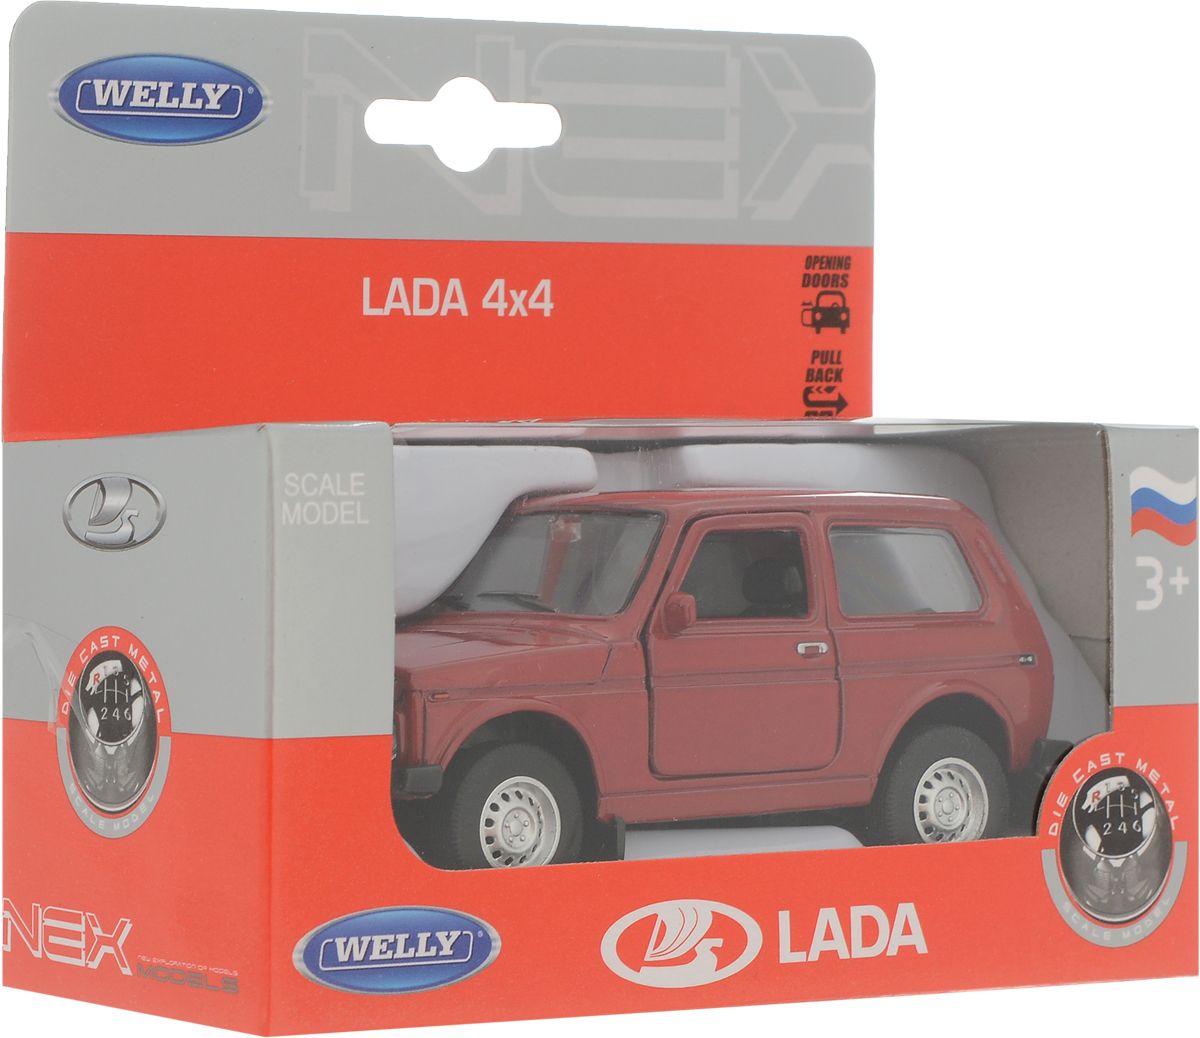 Welly   LADA 4x4  